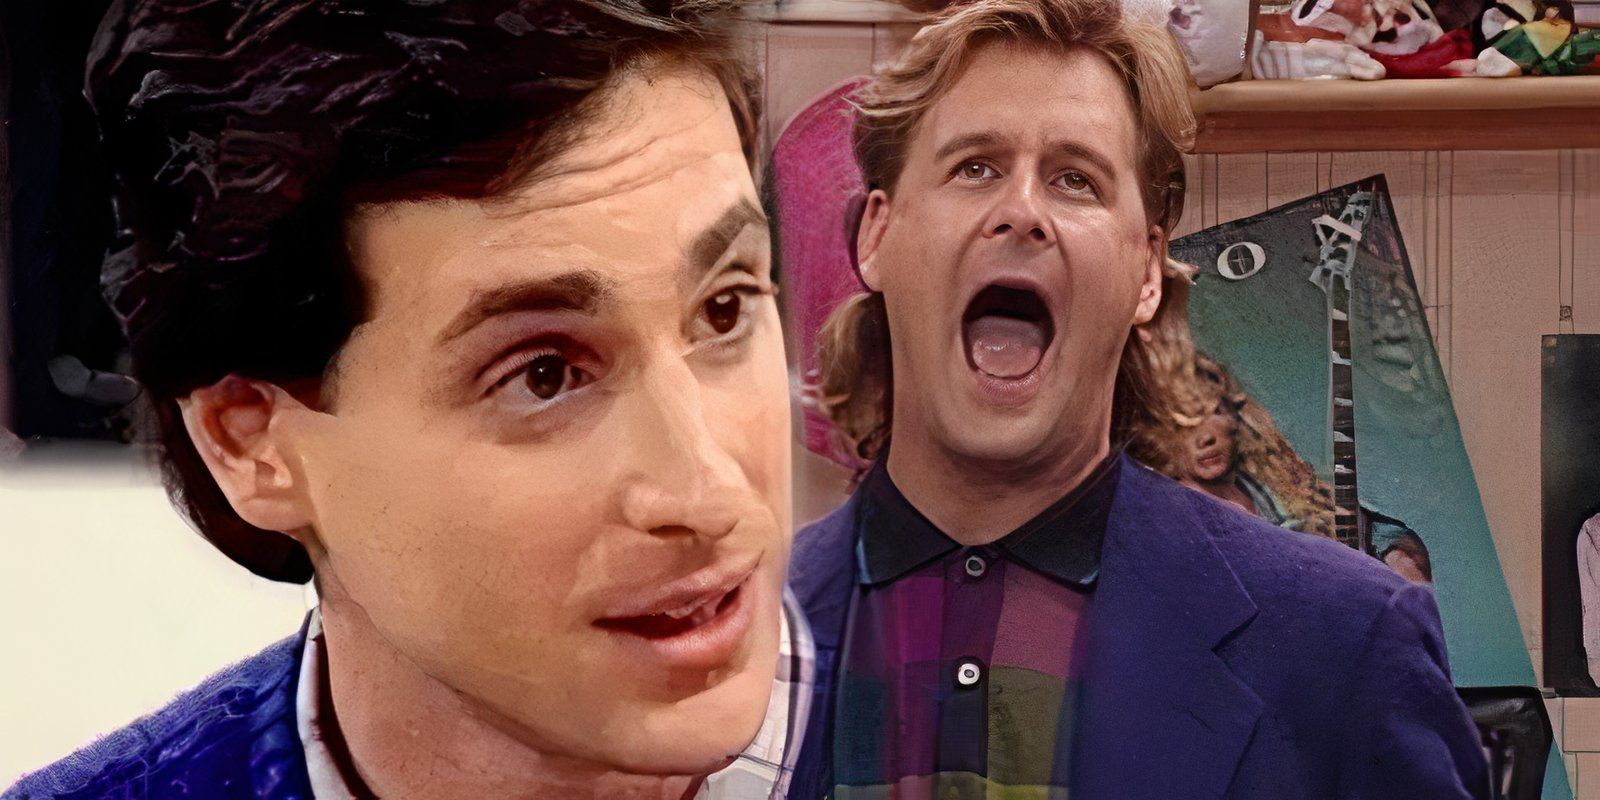 Danny Tanner speaking next to Joey Gladstone singing in Full House